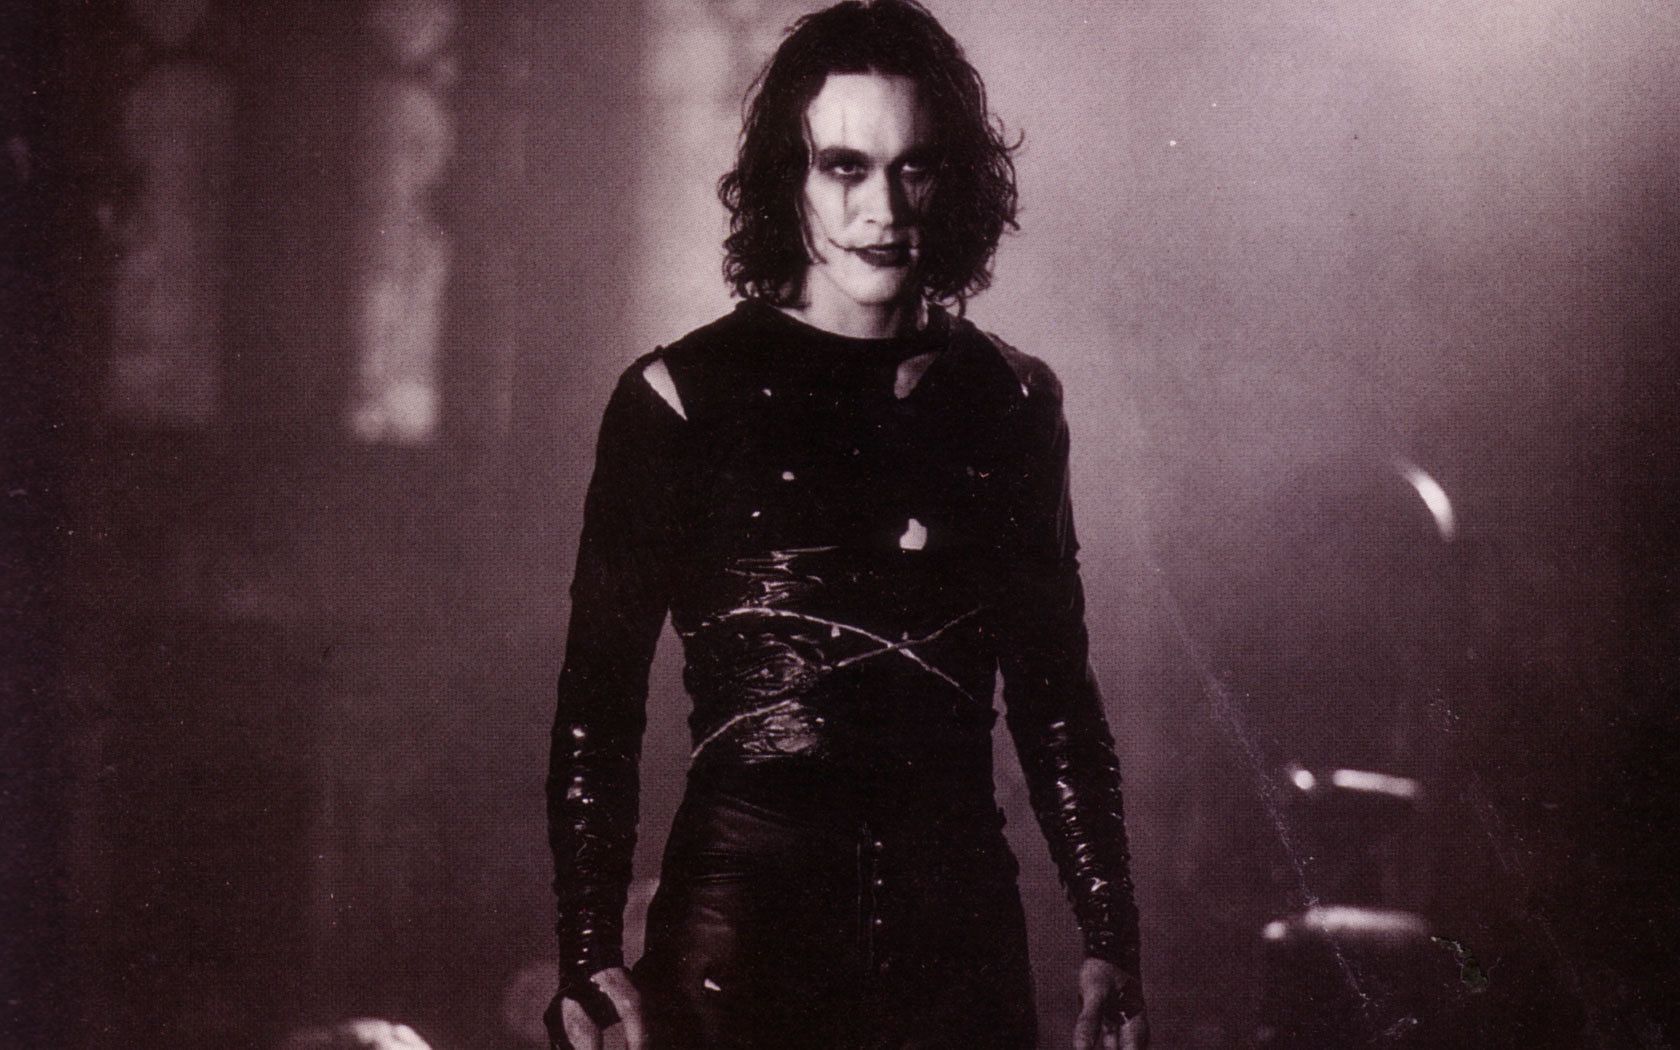 A haunting and stylish tale of revenge, with Brandon Lee delivering a legendary performance (Image via Miramax Films)